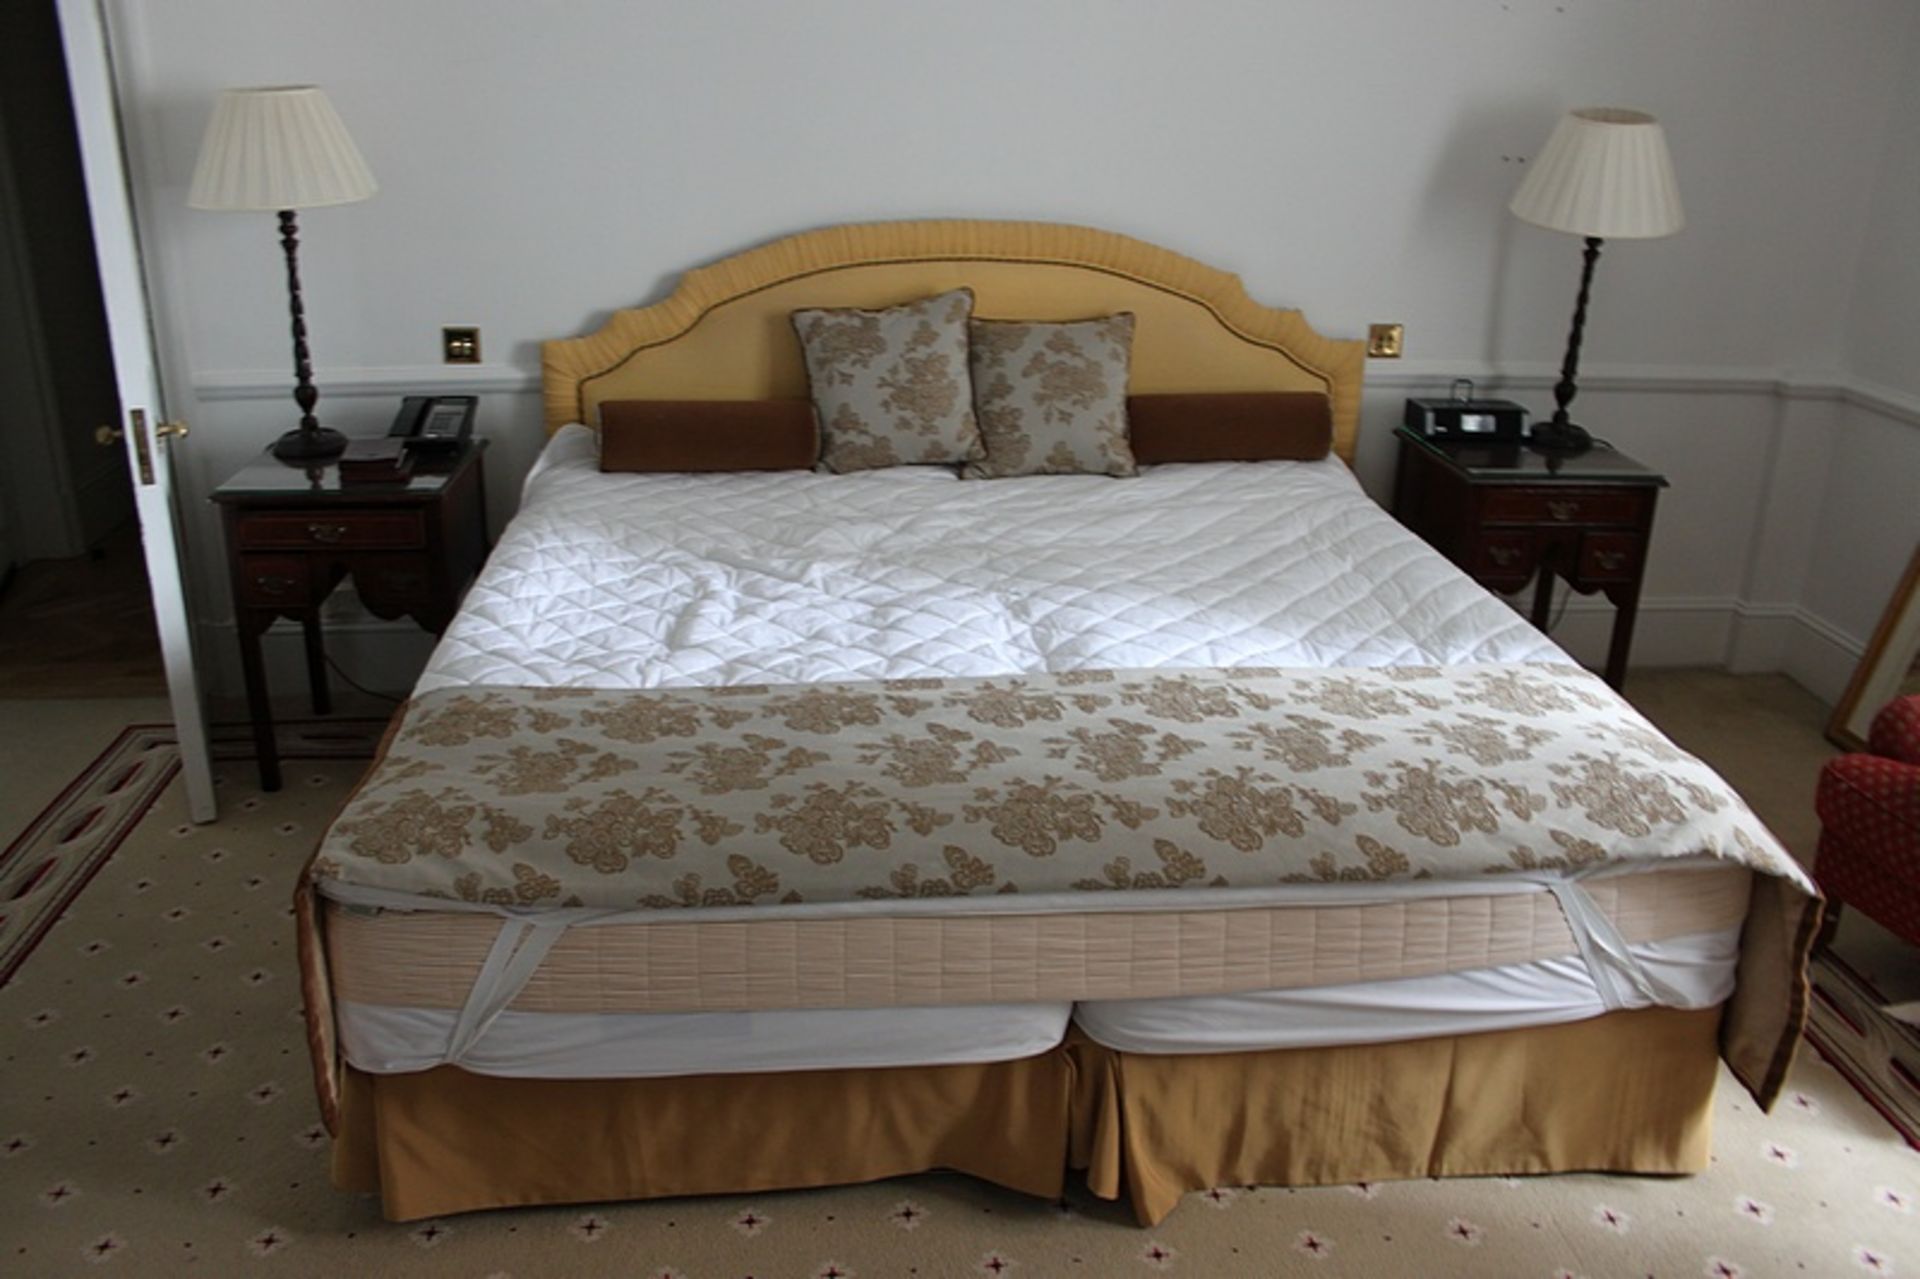 Hospitality Simmons Bedding Company base, mattress and yellow single piped headboard complete with